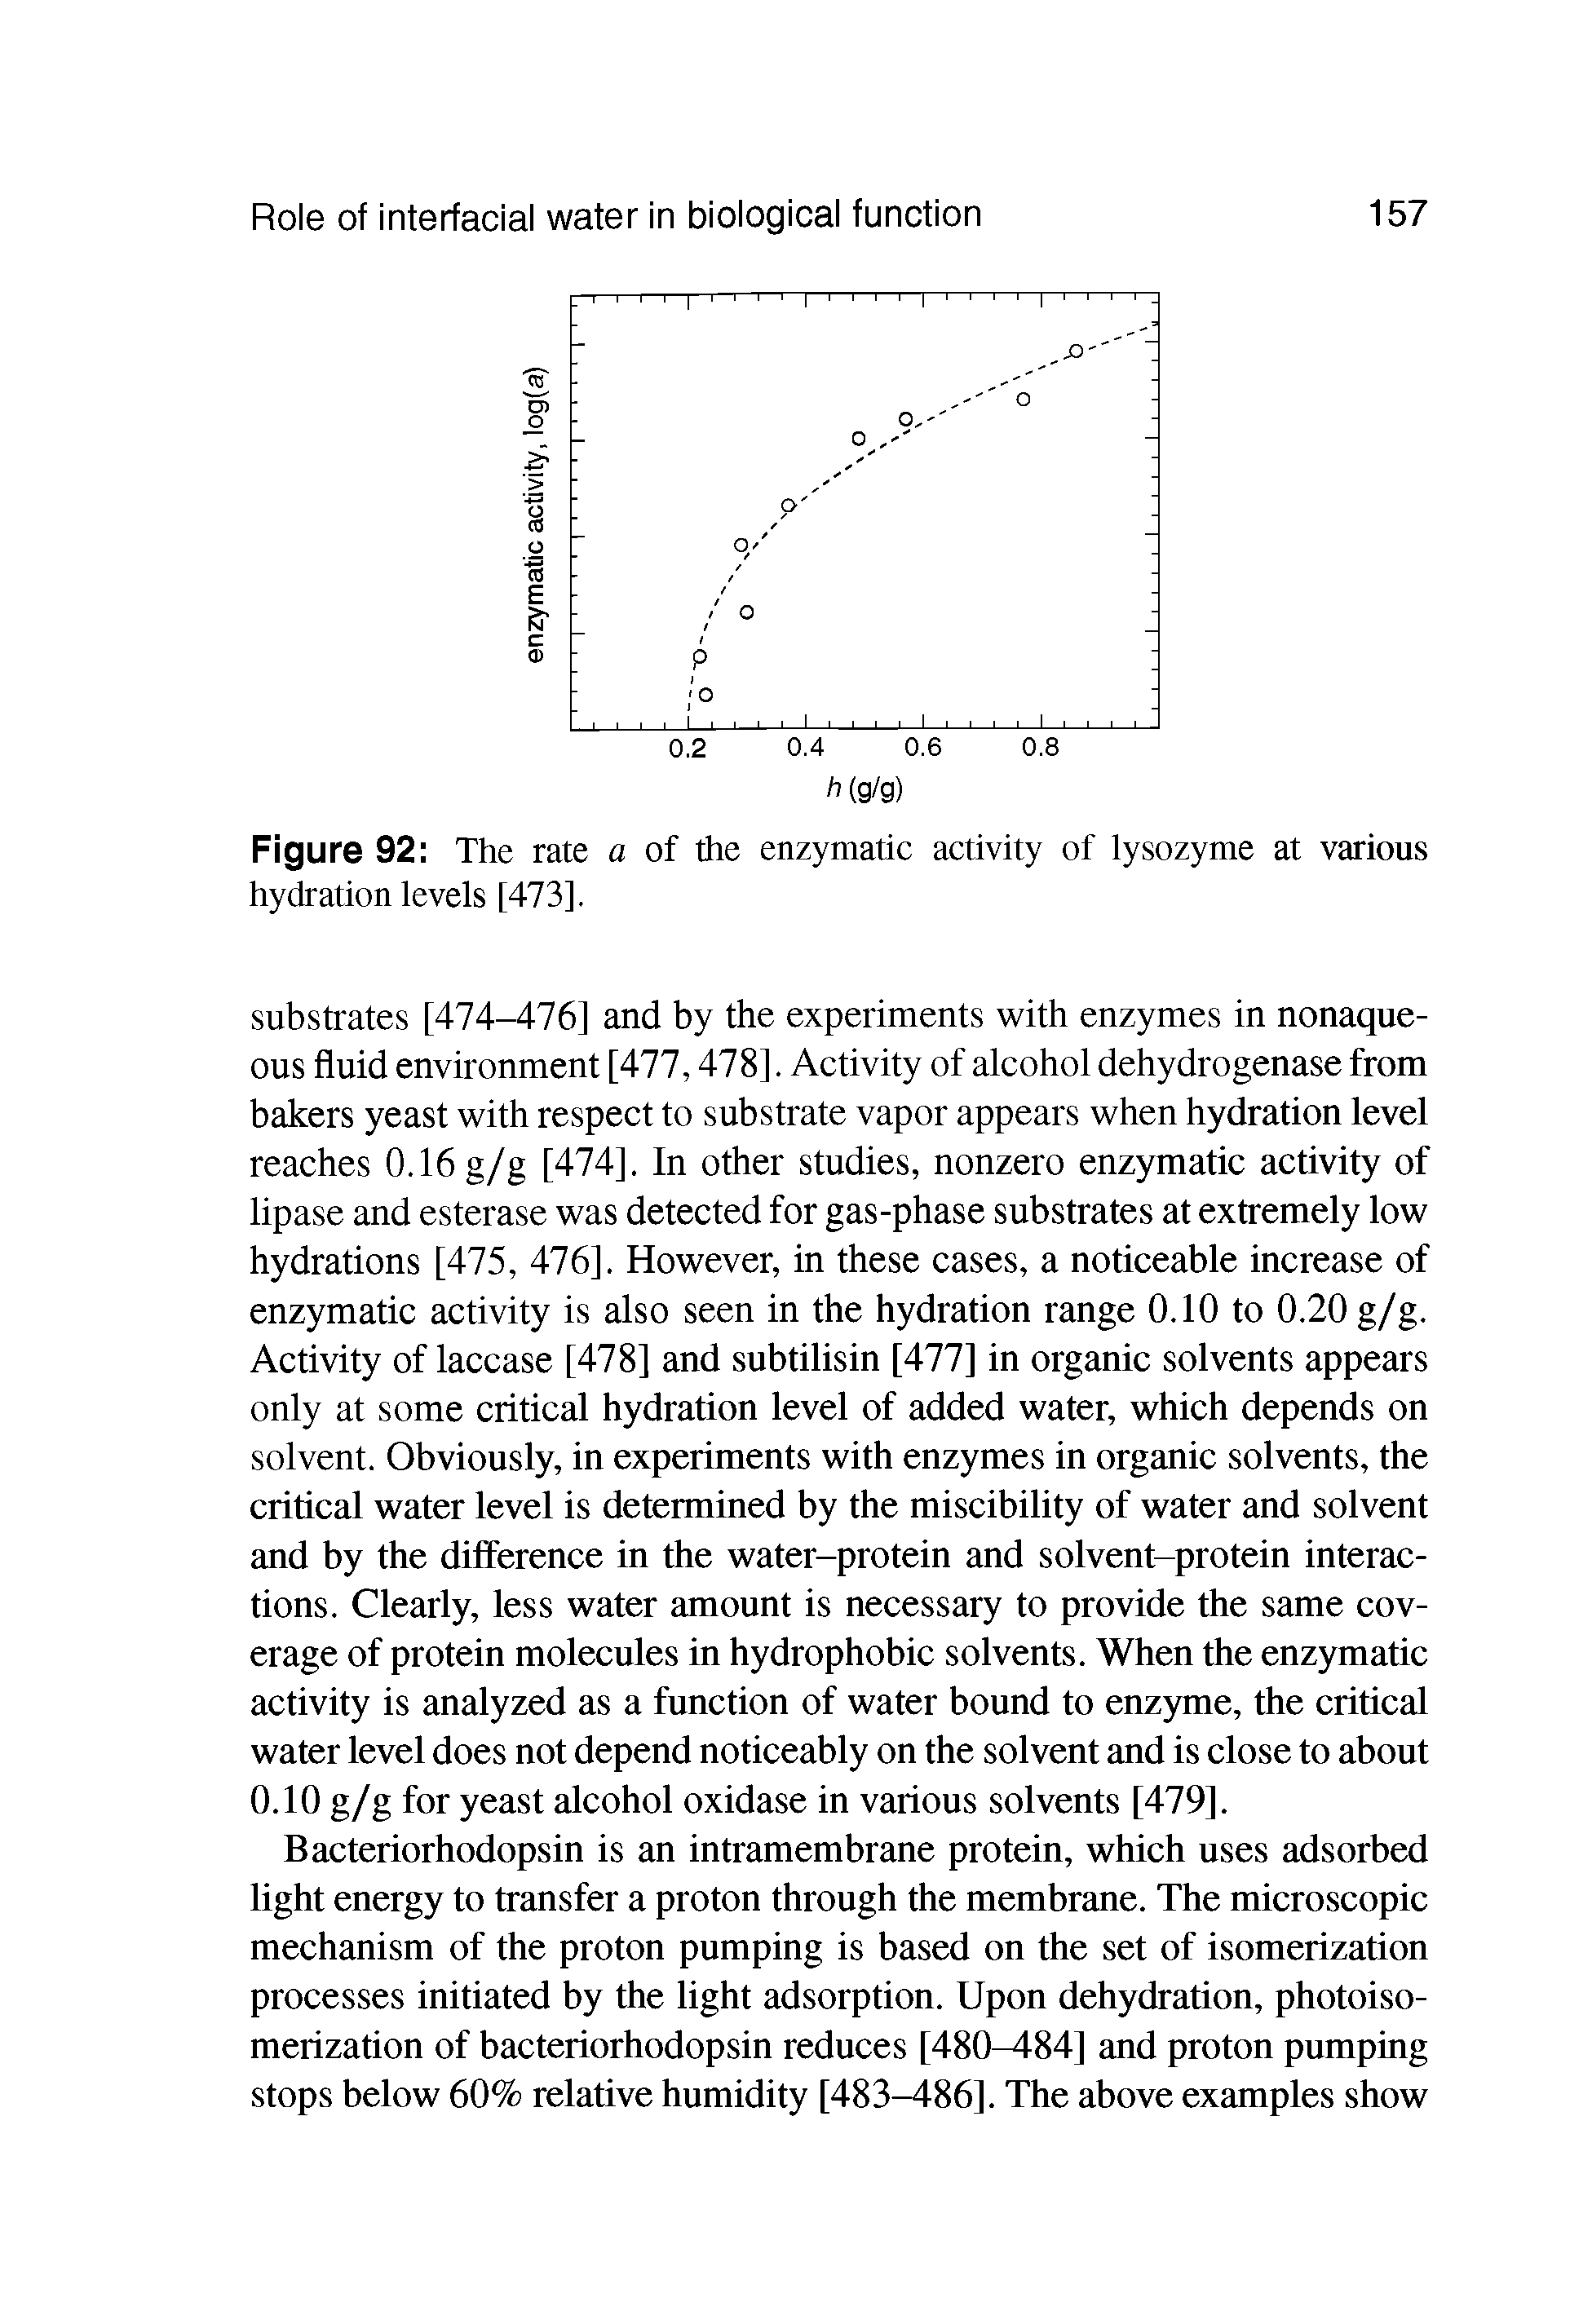 Figure 92 The rate a of the enzymatic activity of lysozyme at various hydration levels [473].